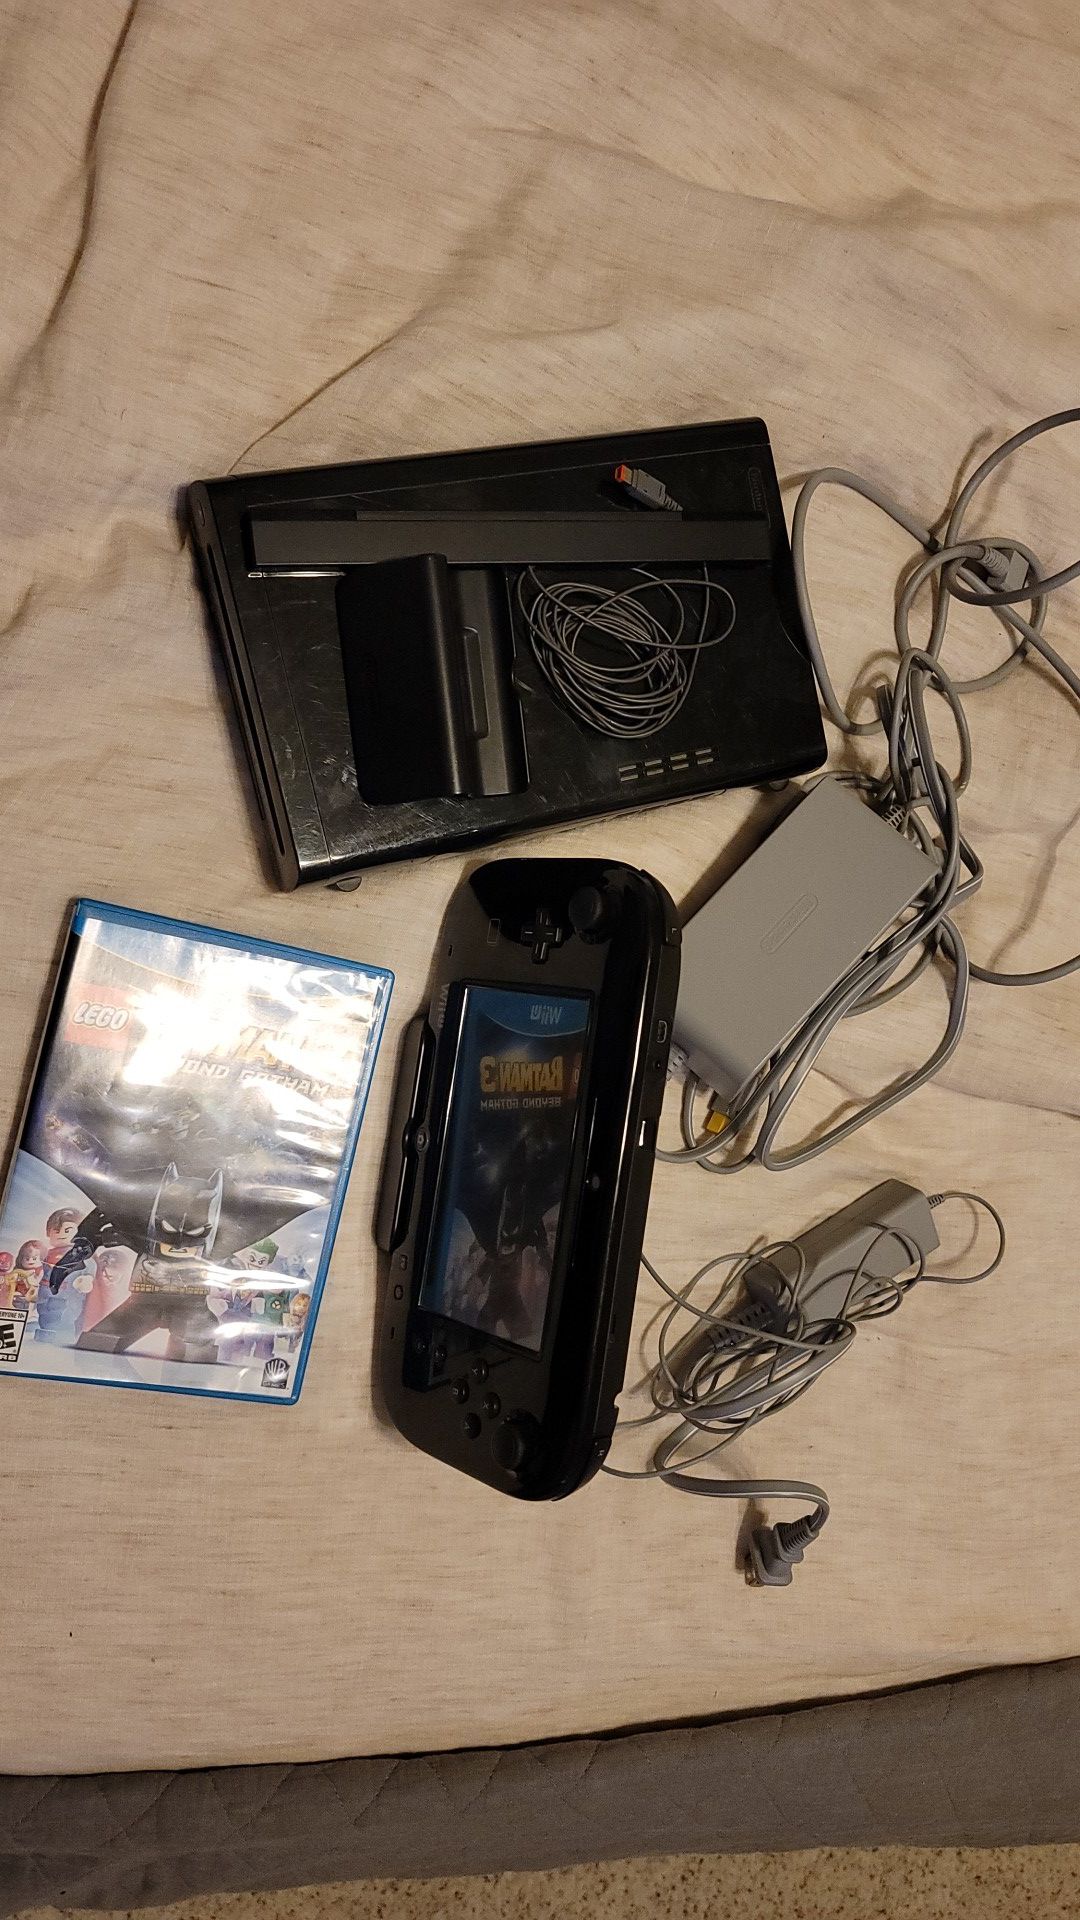 Nintendo Wii u with one game